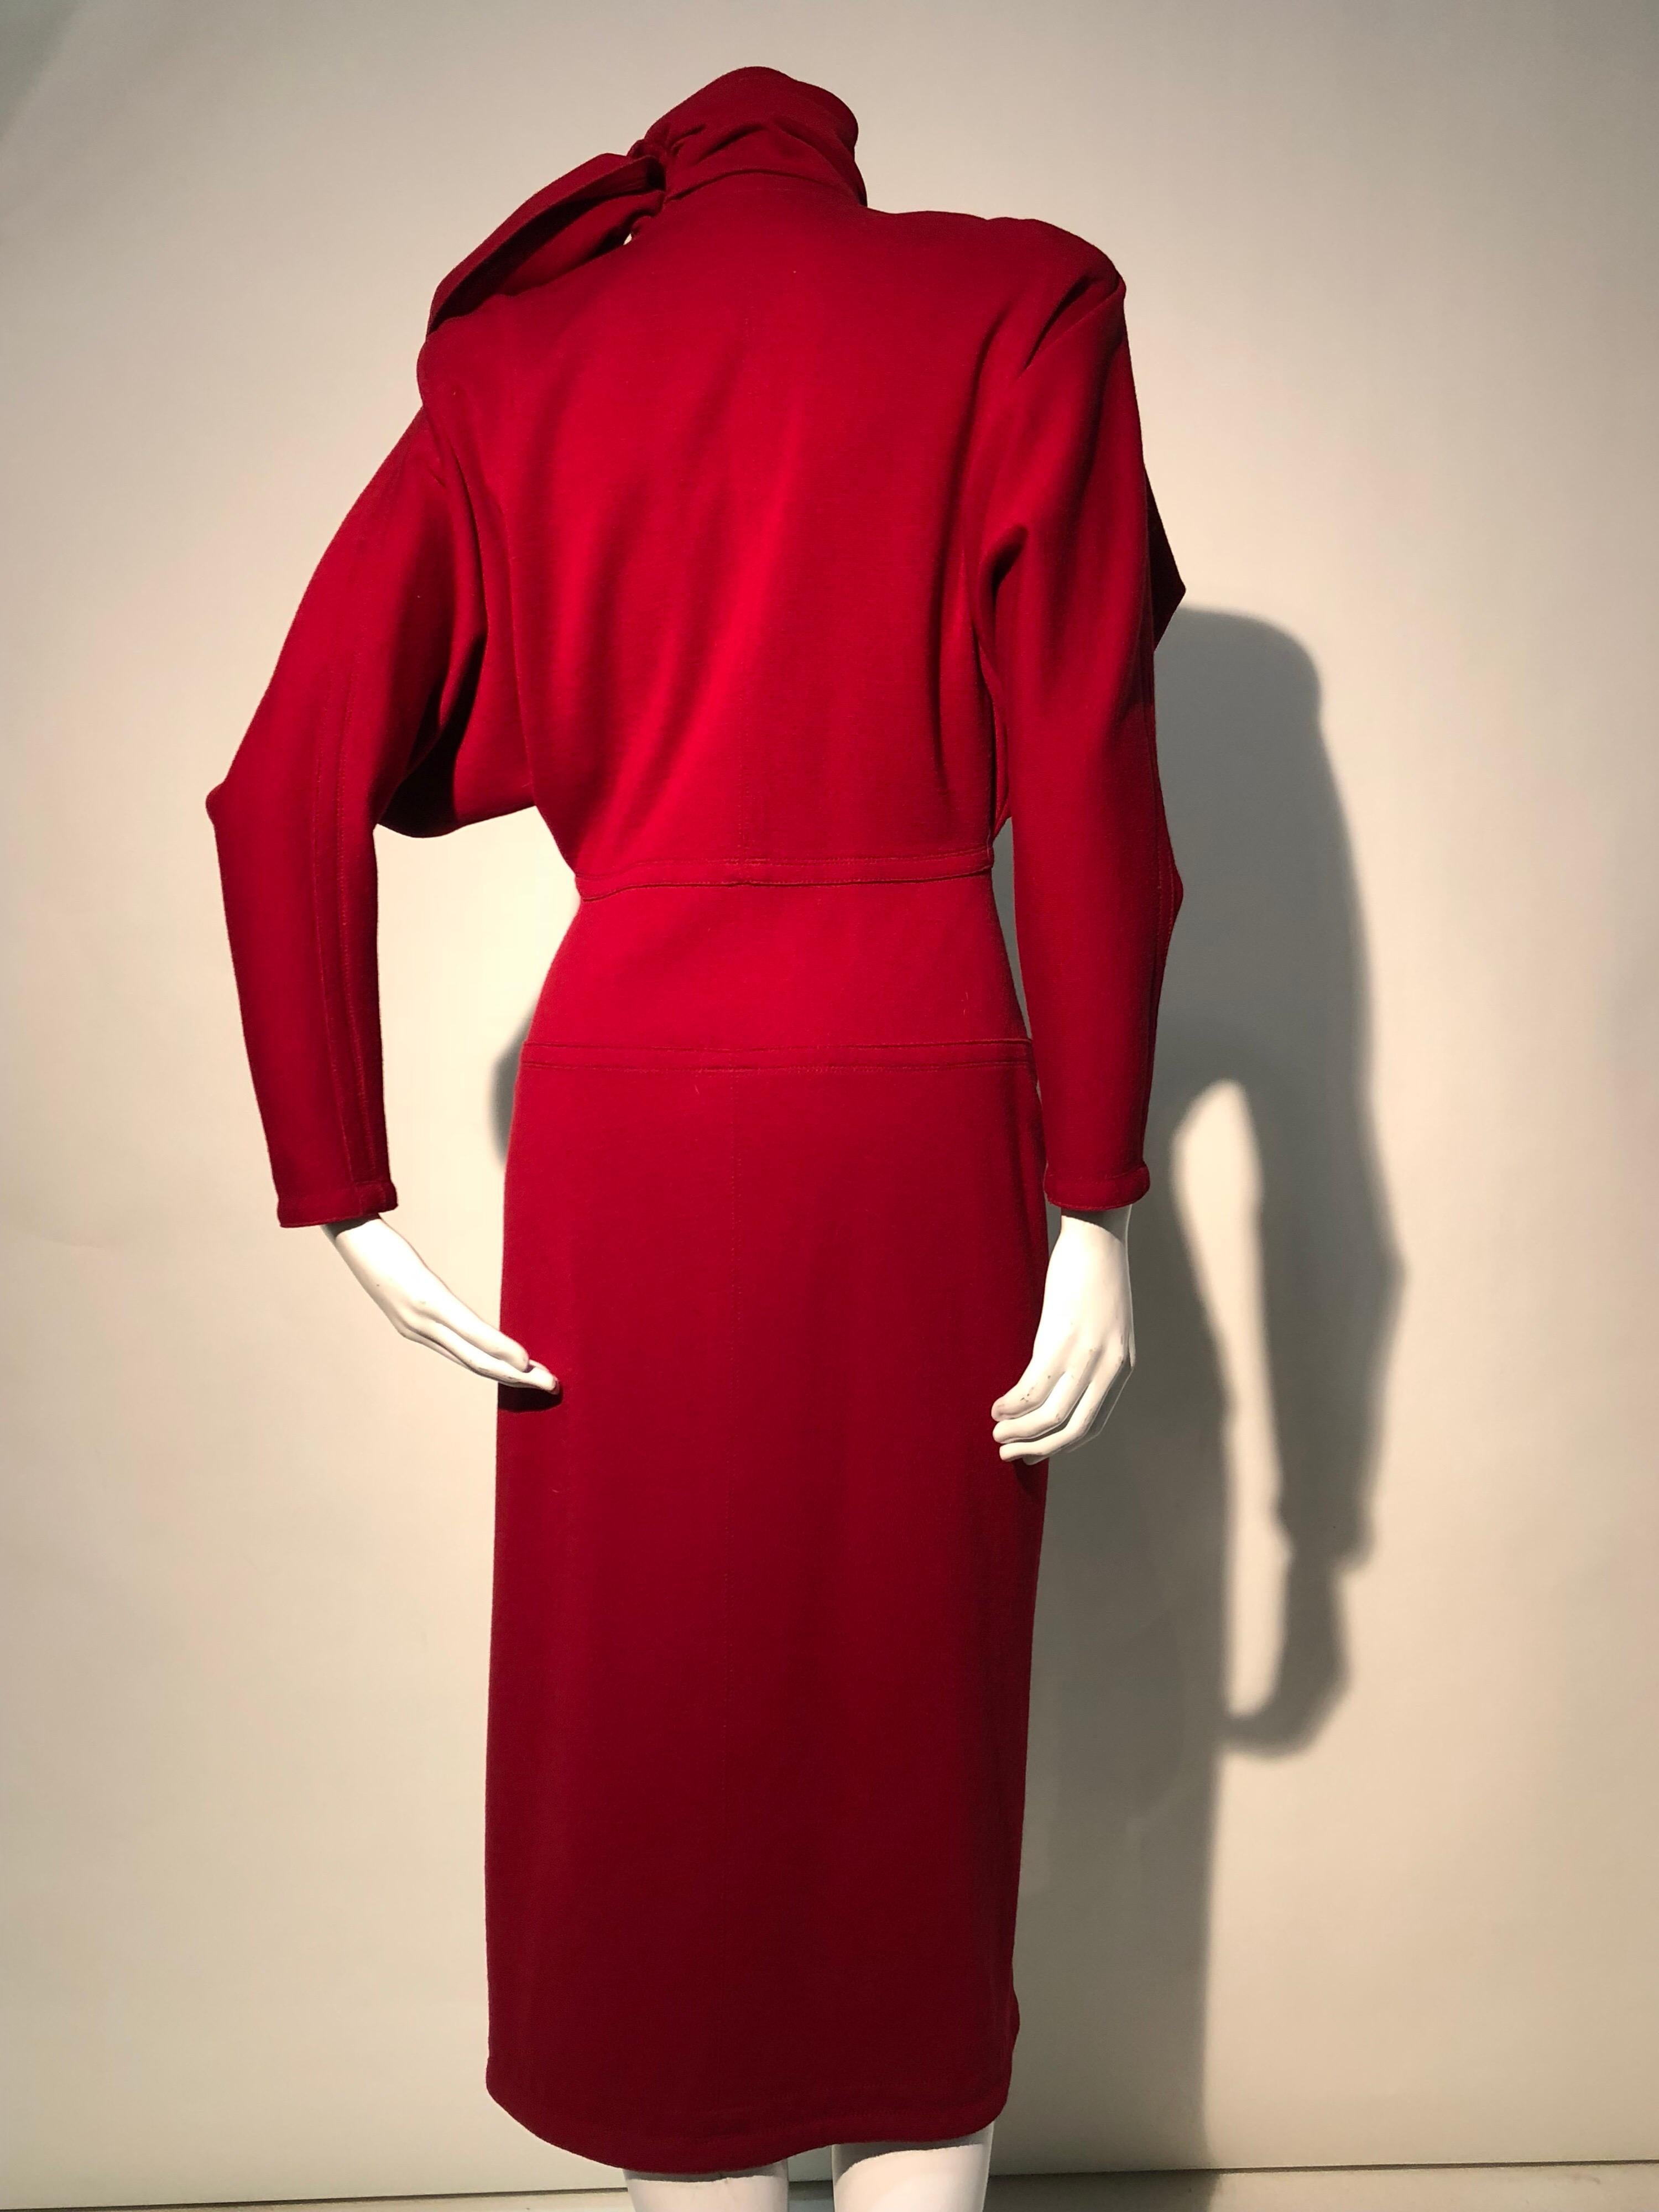 1980s Gianni Versace Vivid Red Wool Wrap-Style Coat Dress W/ Attached Foulard For Sale 3